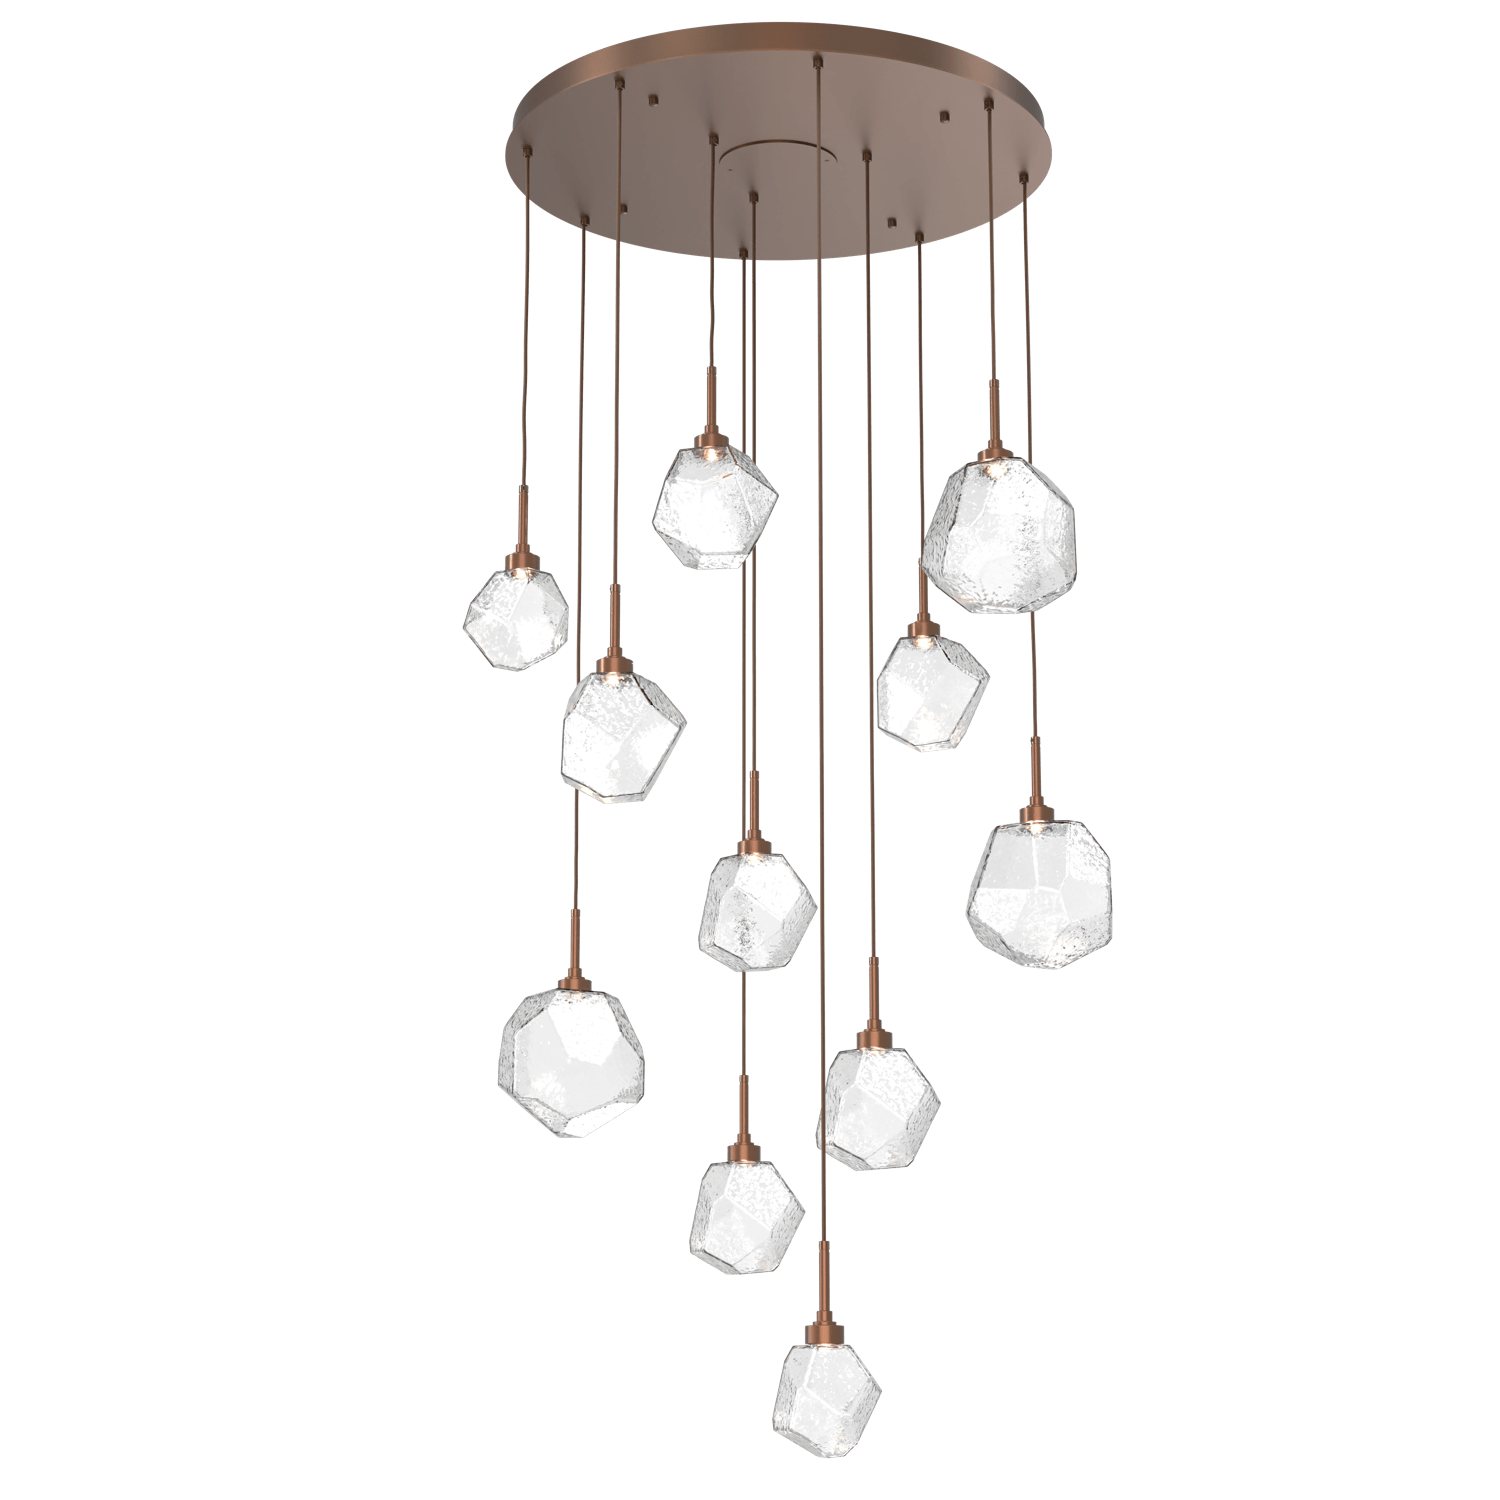 CHB0039-11-BB-C-Hammerton-Studio-Gem-11-light-round-pendant-chandelier-with-burnished-bronze-finish-and-clear-blown-glass-shades-and-LED-lamping